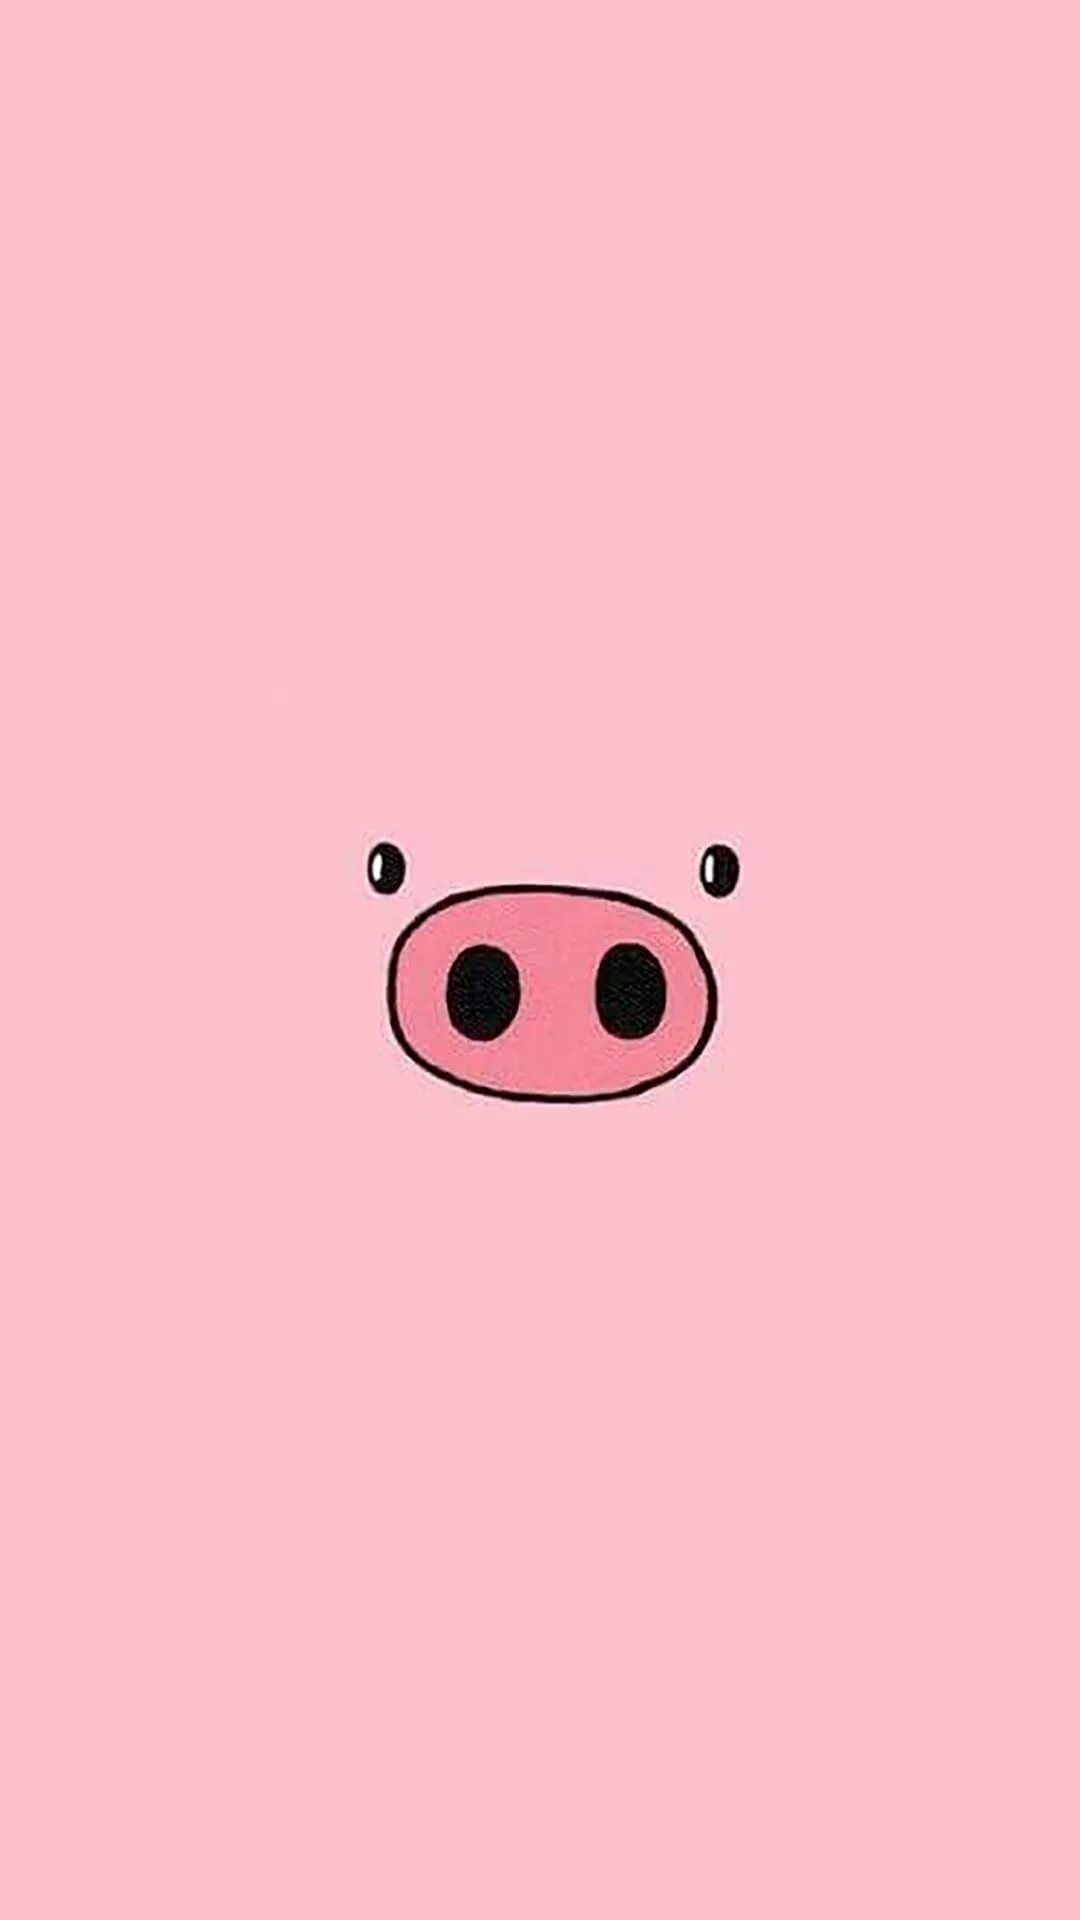 Popular pig iPhone wallpapers, Funny pig backgrounds, Piggy phone wallpapers, Cute animal wallpapers, 1080x1920 Full HD Phone